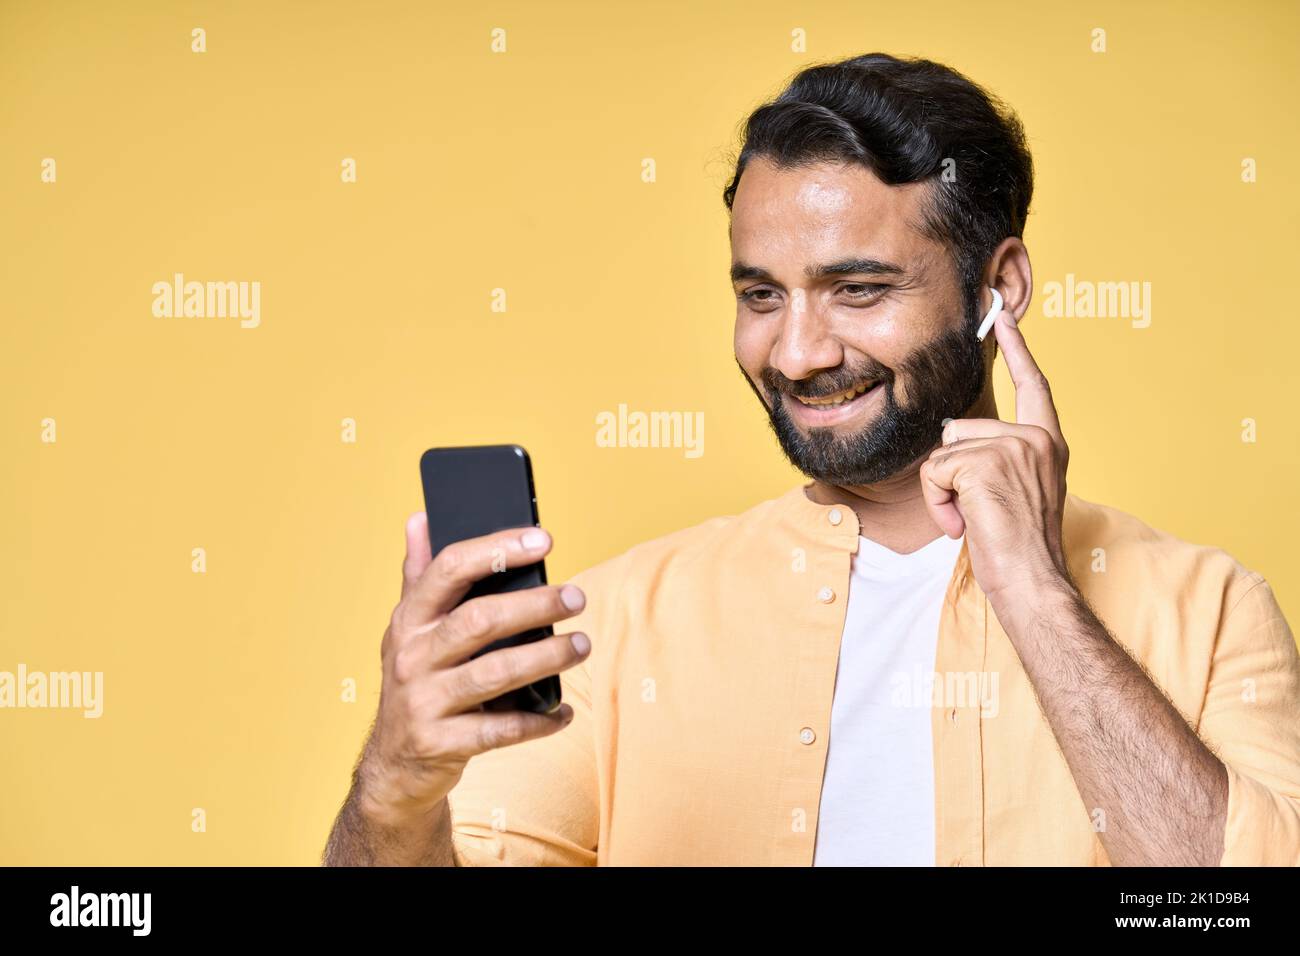 Happy indian man wearing earbuds using mobile phone making video call. Stock Photo